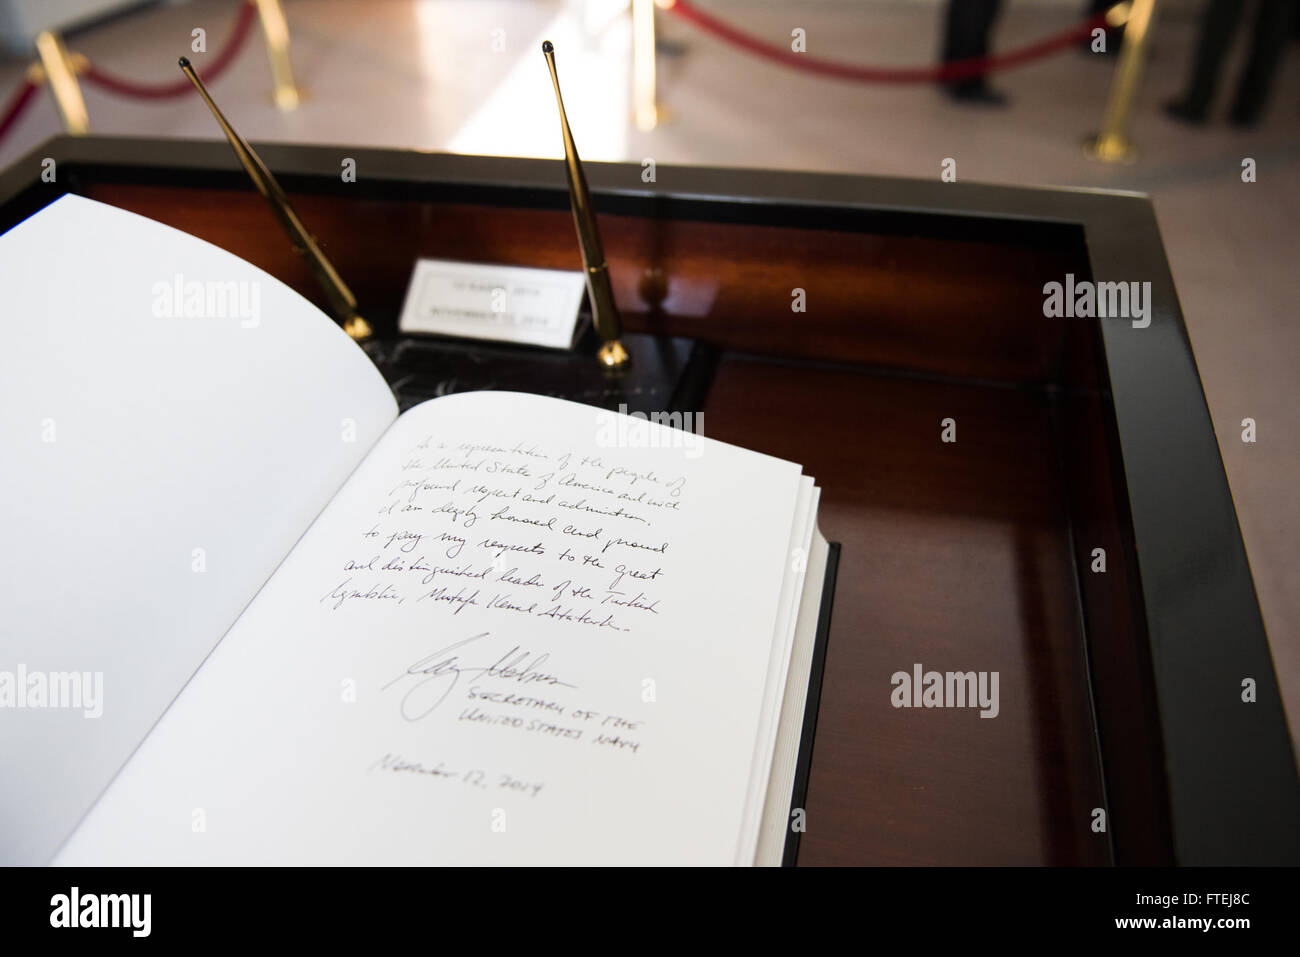 ANKARA, Turkey (Nov. 12, 2014) Secretary of the Navy (SECNAV) Ray MabusÕ signature remains in the Honor Book at the monumental mausoleum Anitkabir. Mabus signed the book after participating in a wreath laying ceremony at the monument to deliver respects to the historical Turkish leader, Mustafa Kemal Ataturk. Stock Photo